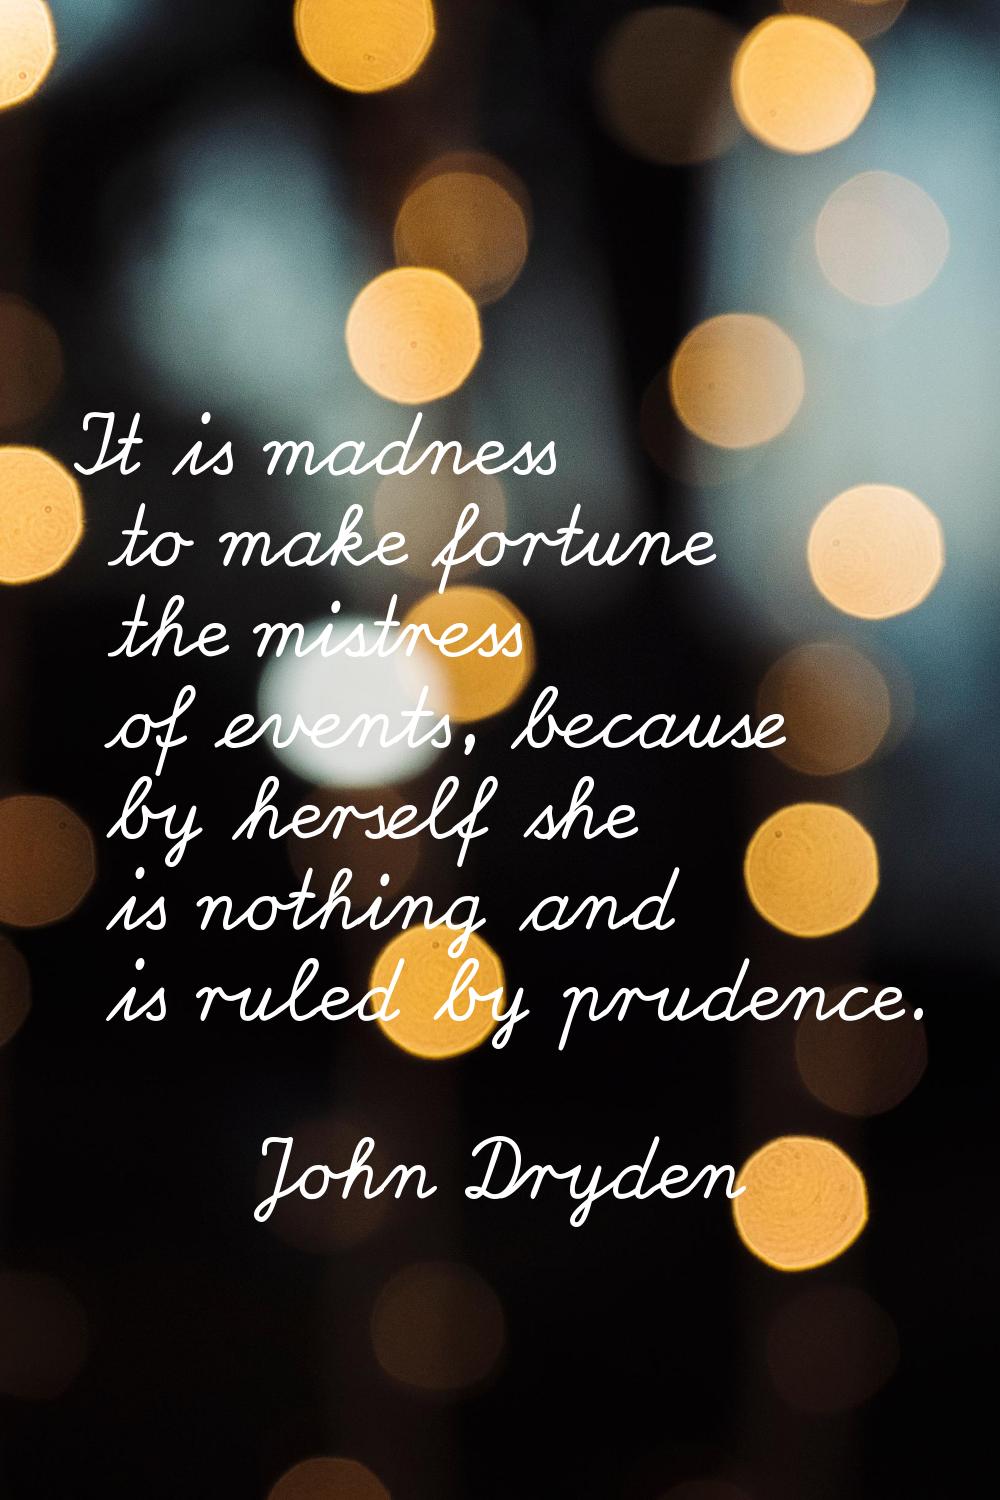 It is madness to make fortune the mistress of events, because by herself she is nothing and is rule